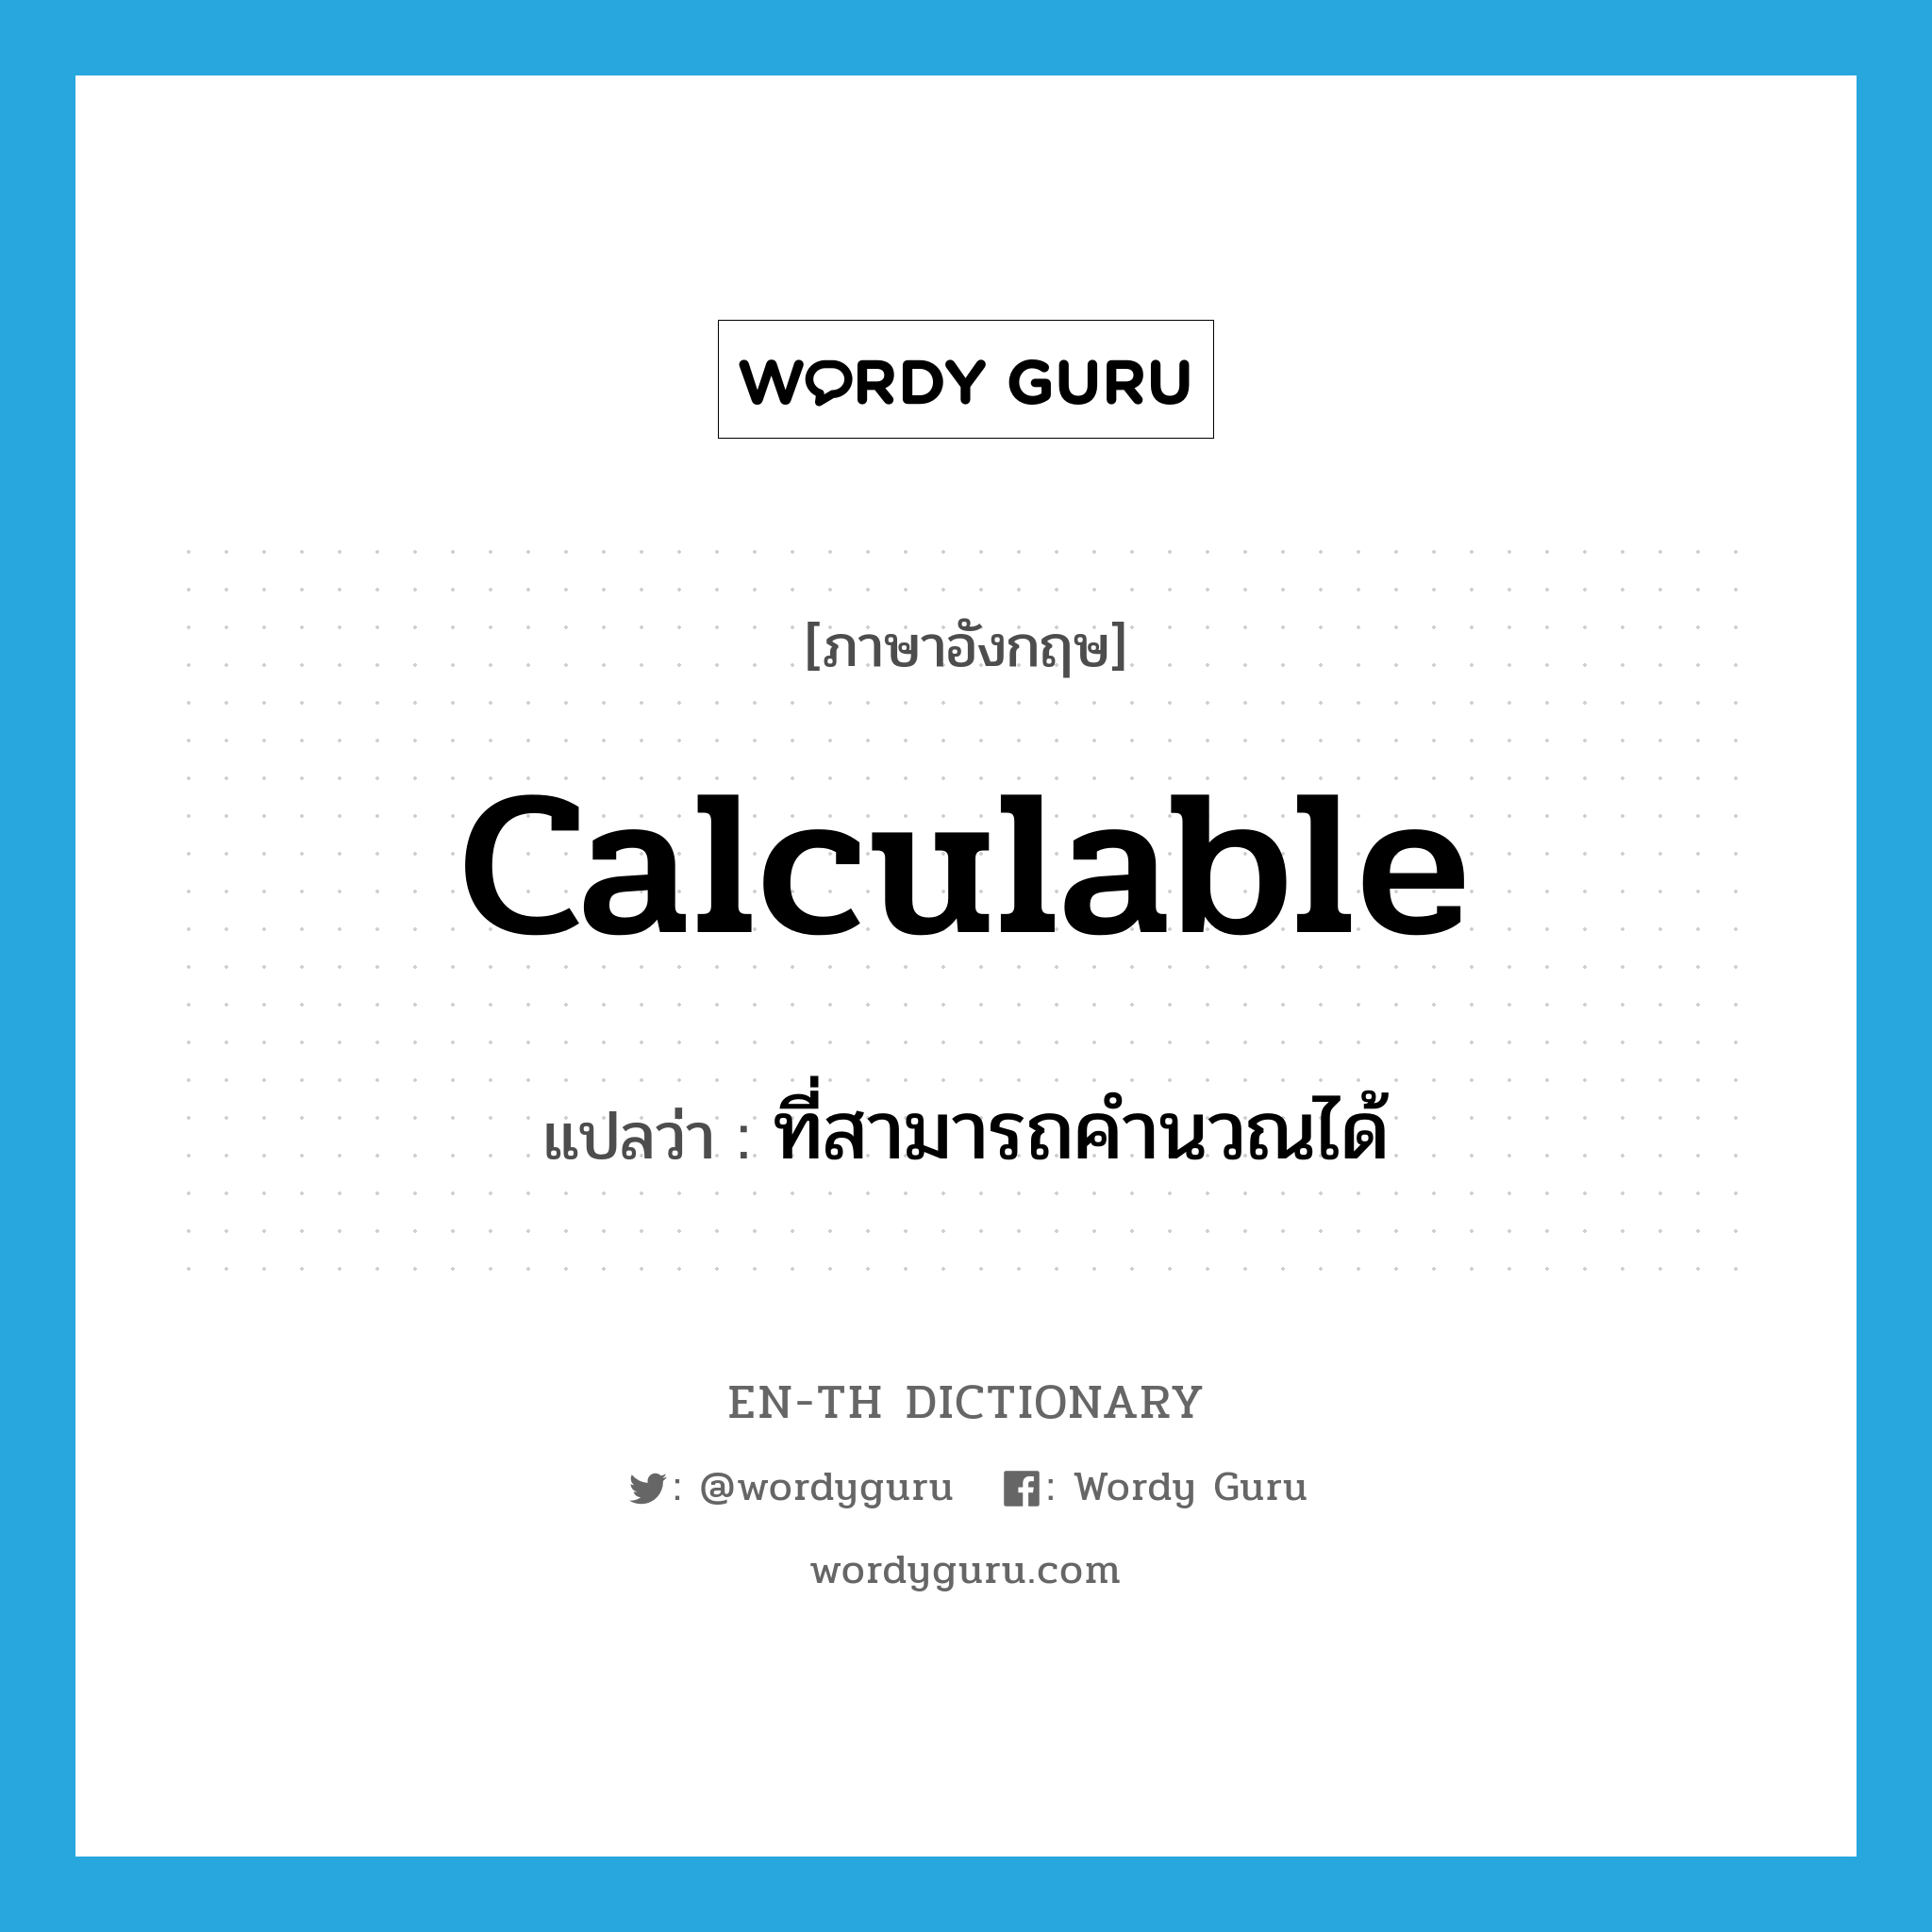 calculable